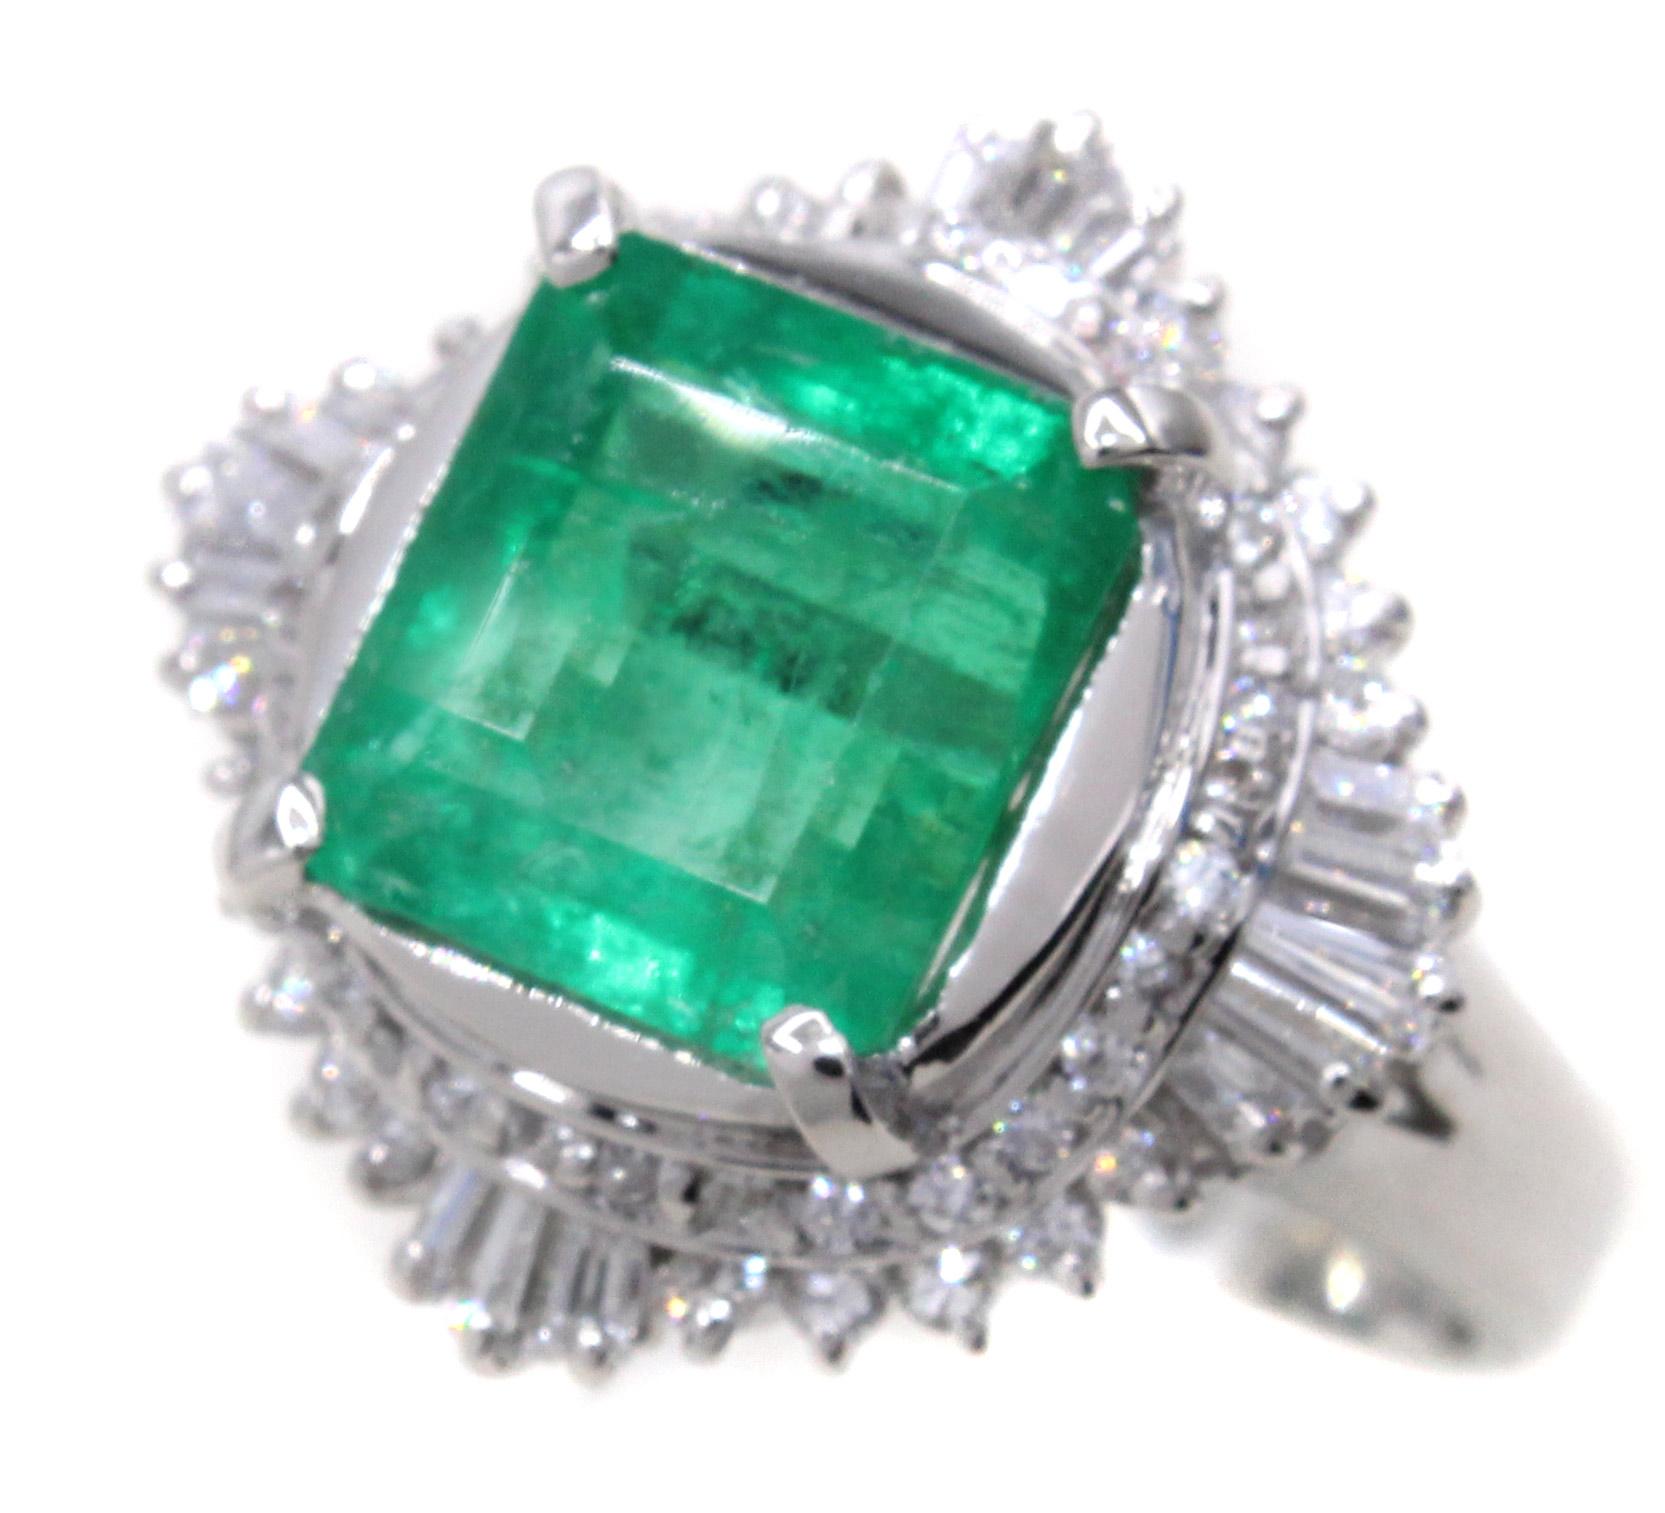 A square cut forest green emerald is the center piece of this beautiful and well hand-crafted 1970s ring. The emerald has been measured to weigh approximately 3.85 carats and is surrounded by a wavy gallery of white bright round brilliant cut and